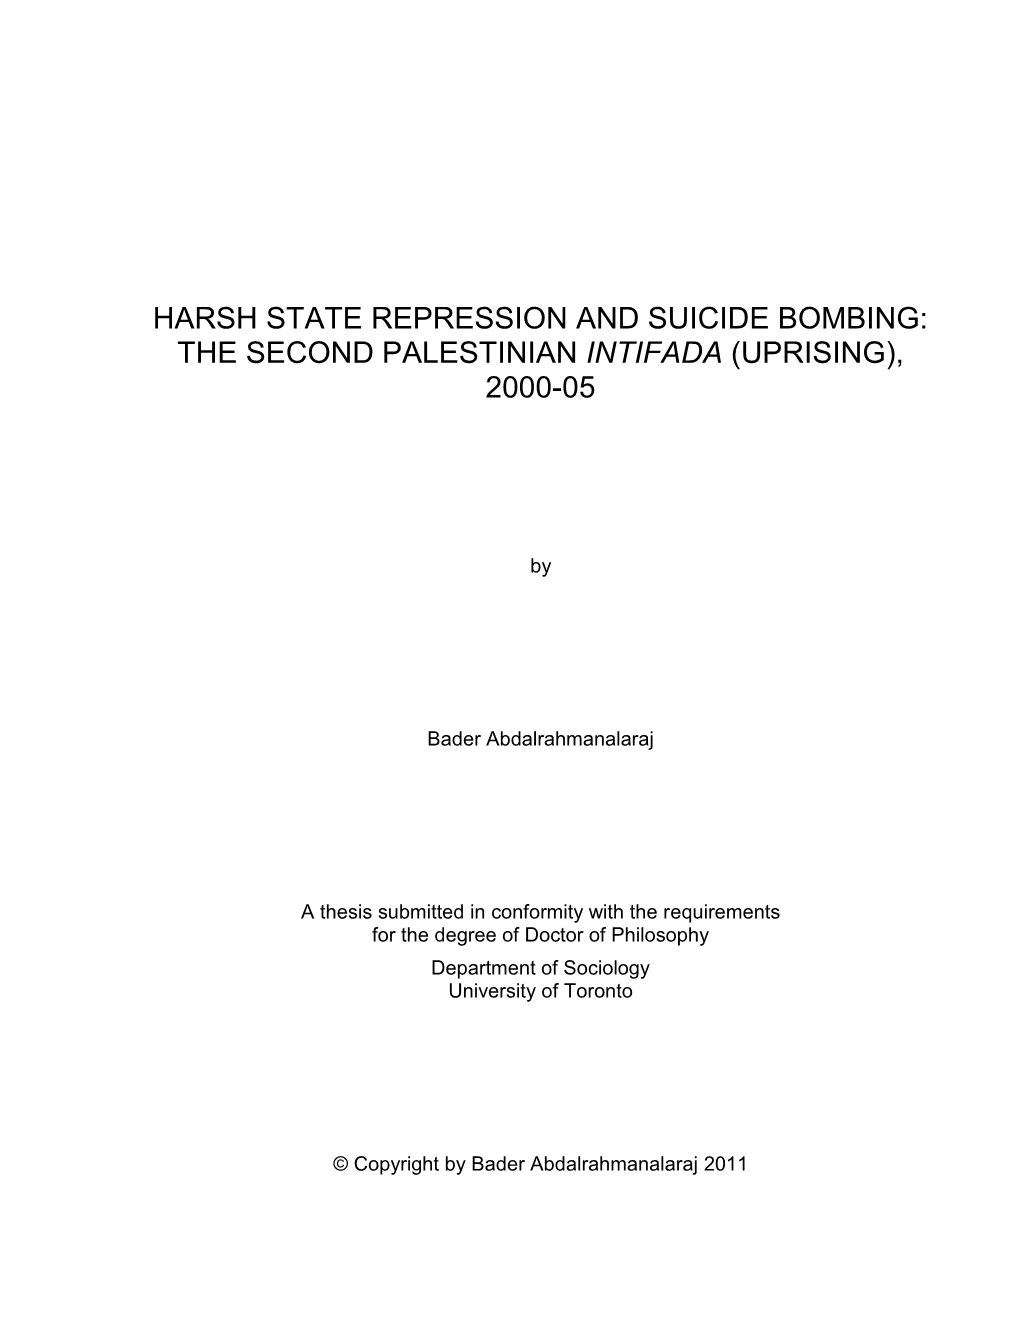 Harsh State Repression and Suicide Bombing: the Second Palestinian Intifada (Uprising), 2000-05